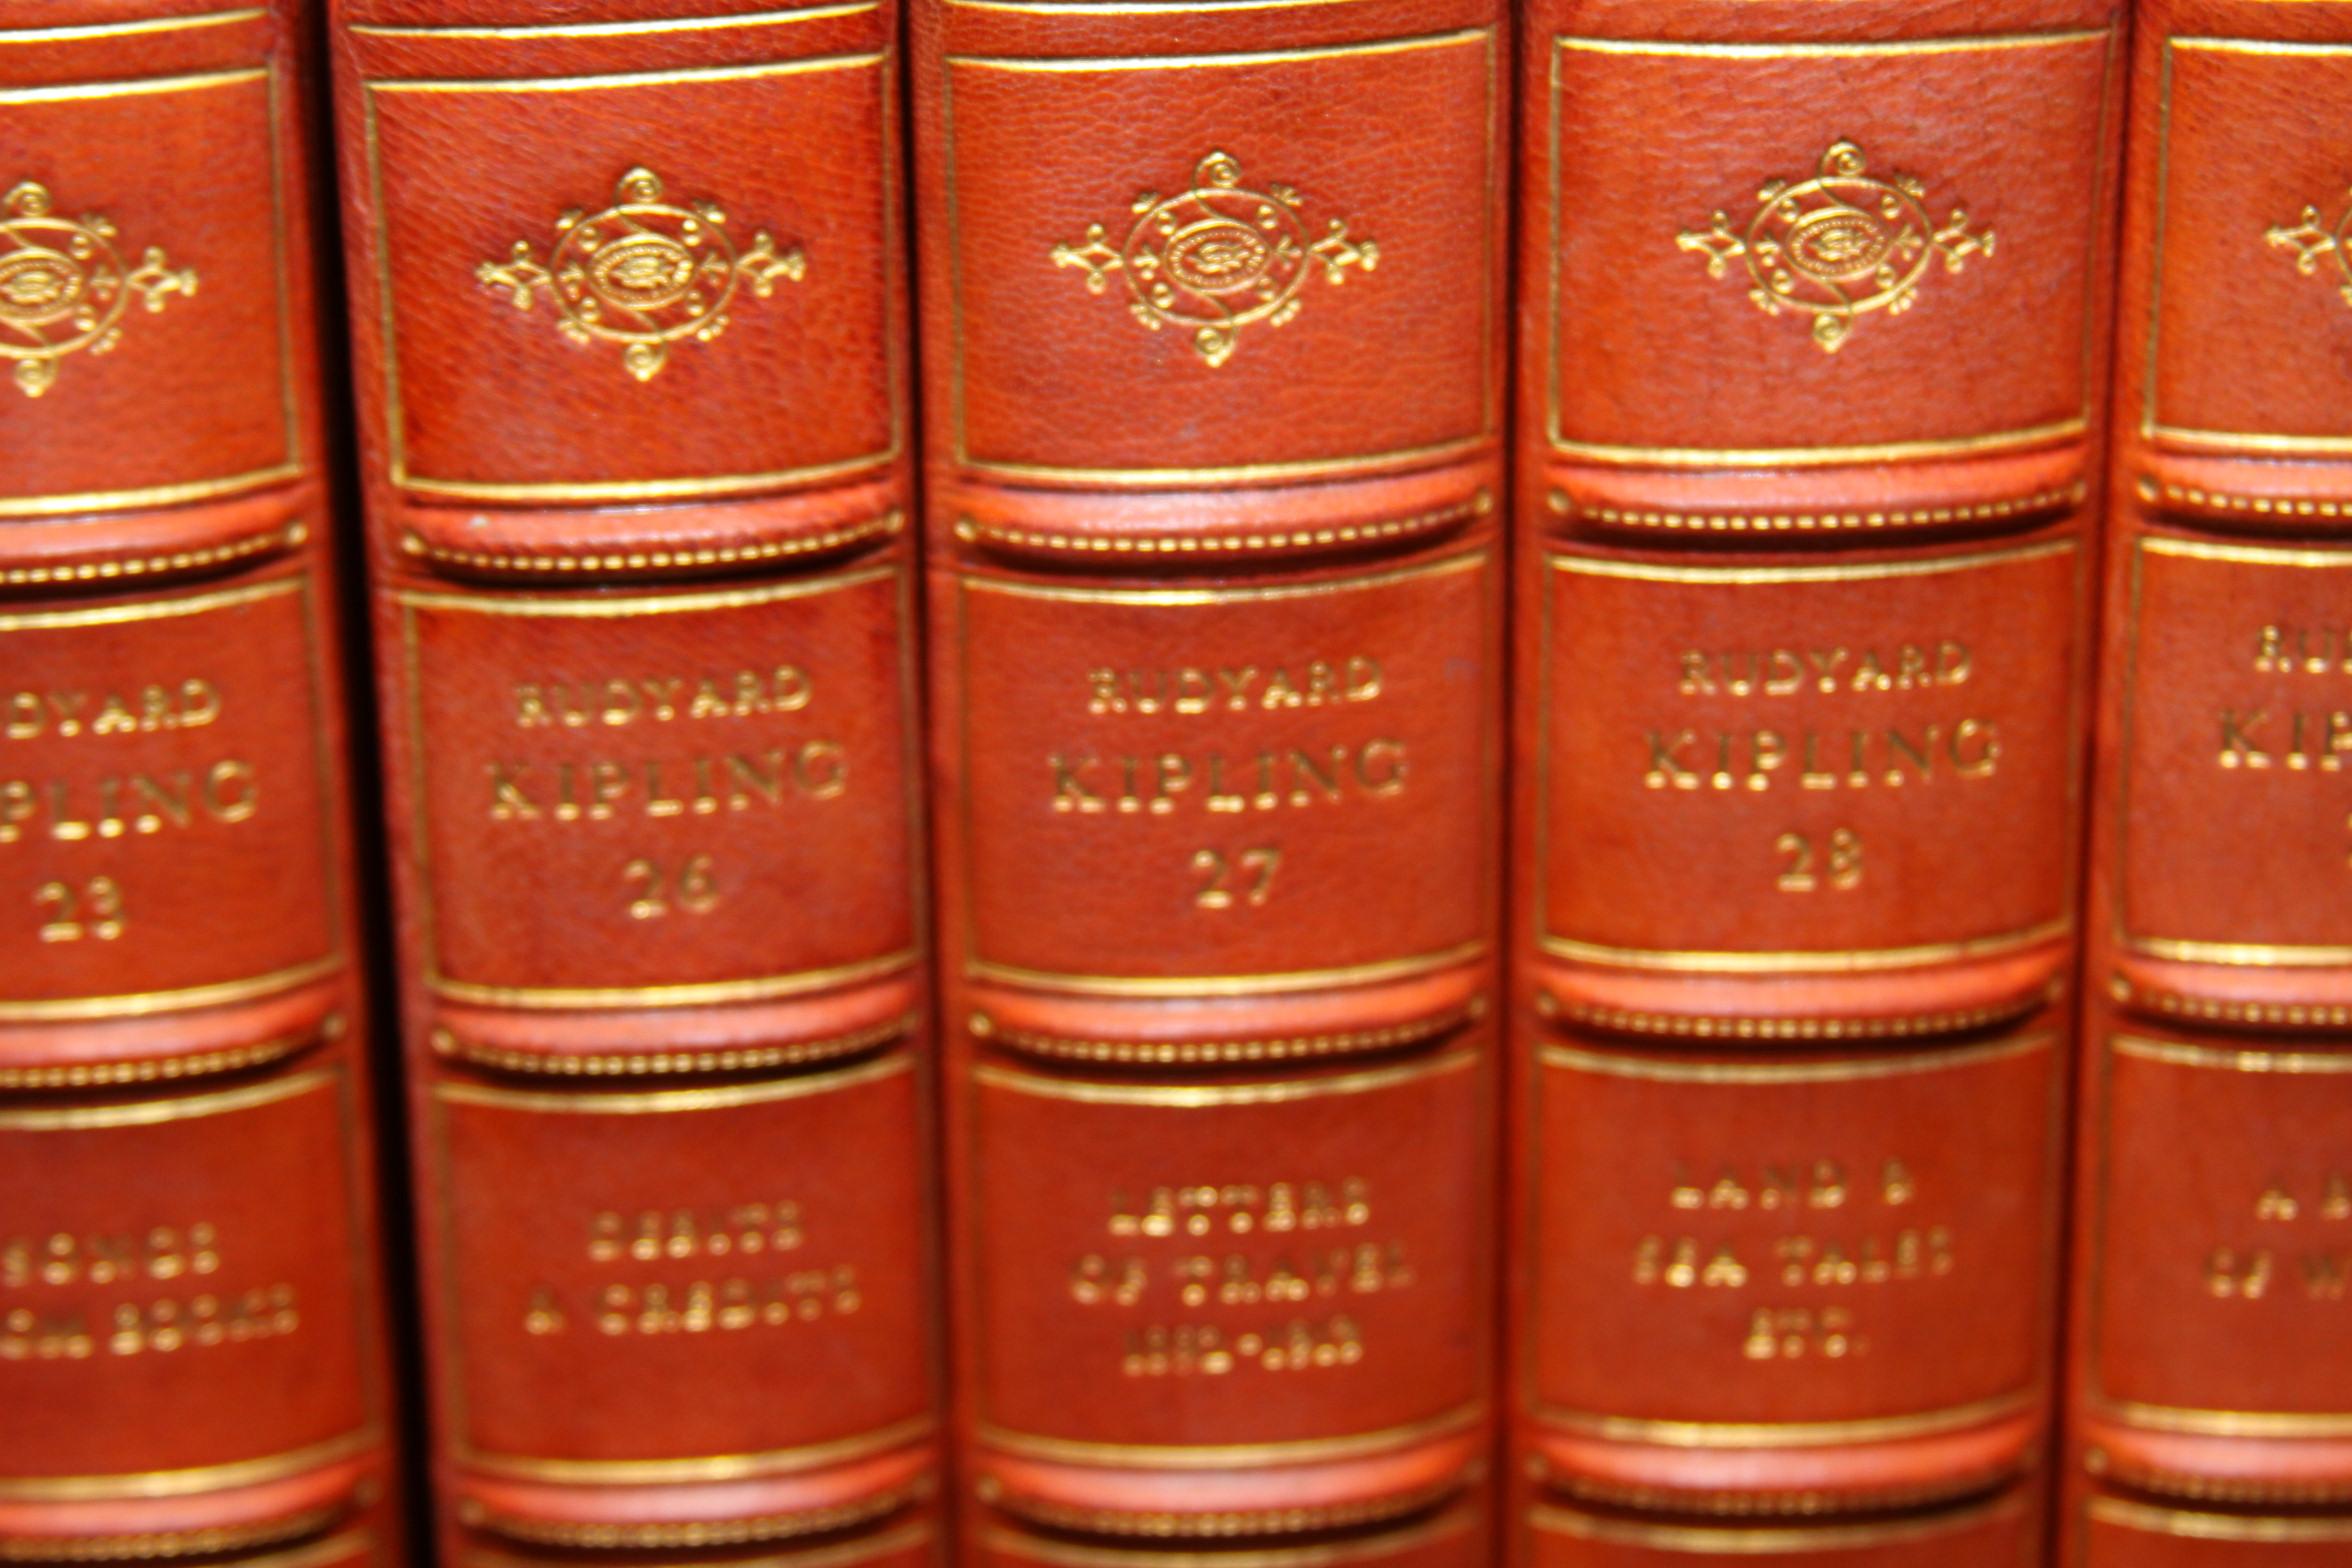 20th Century Books the Writings of Rudyard Kipling, the Bombay Edition Collected Antiques Set